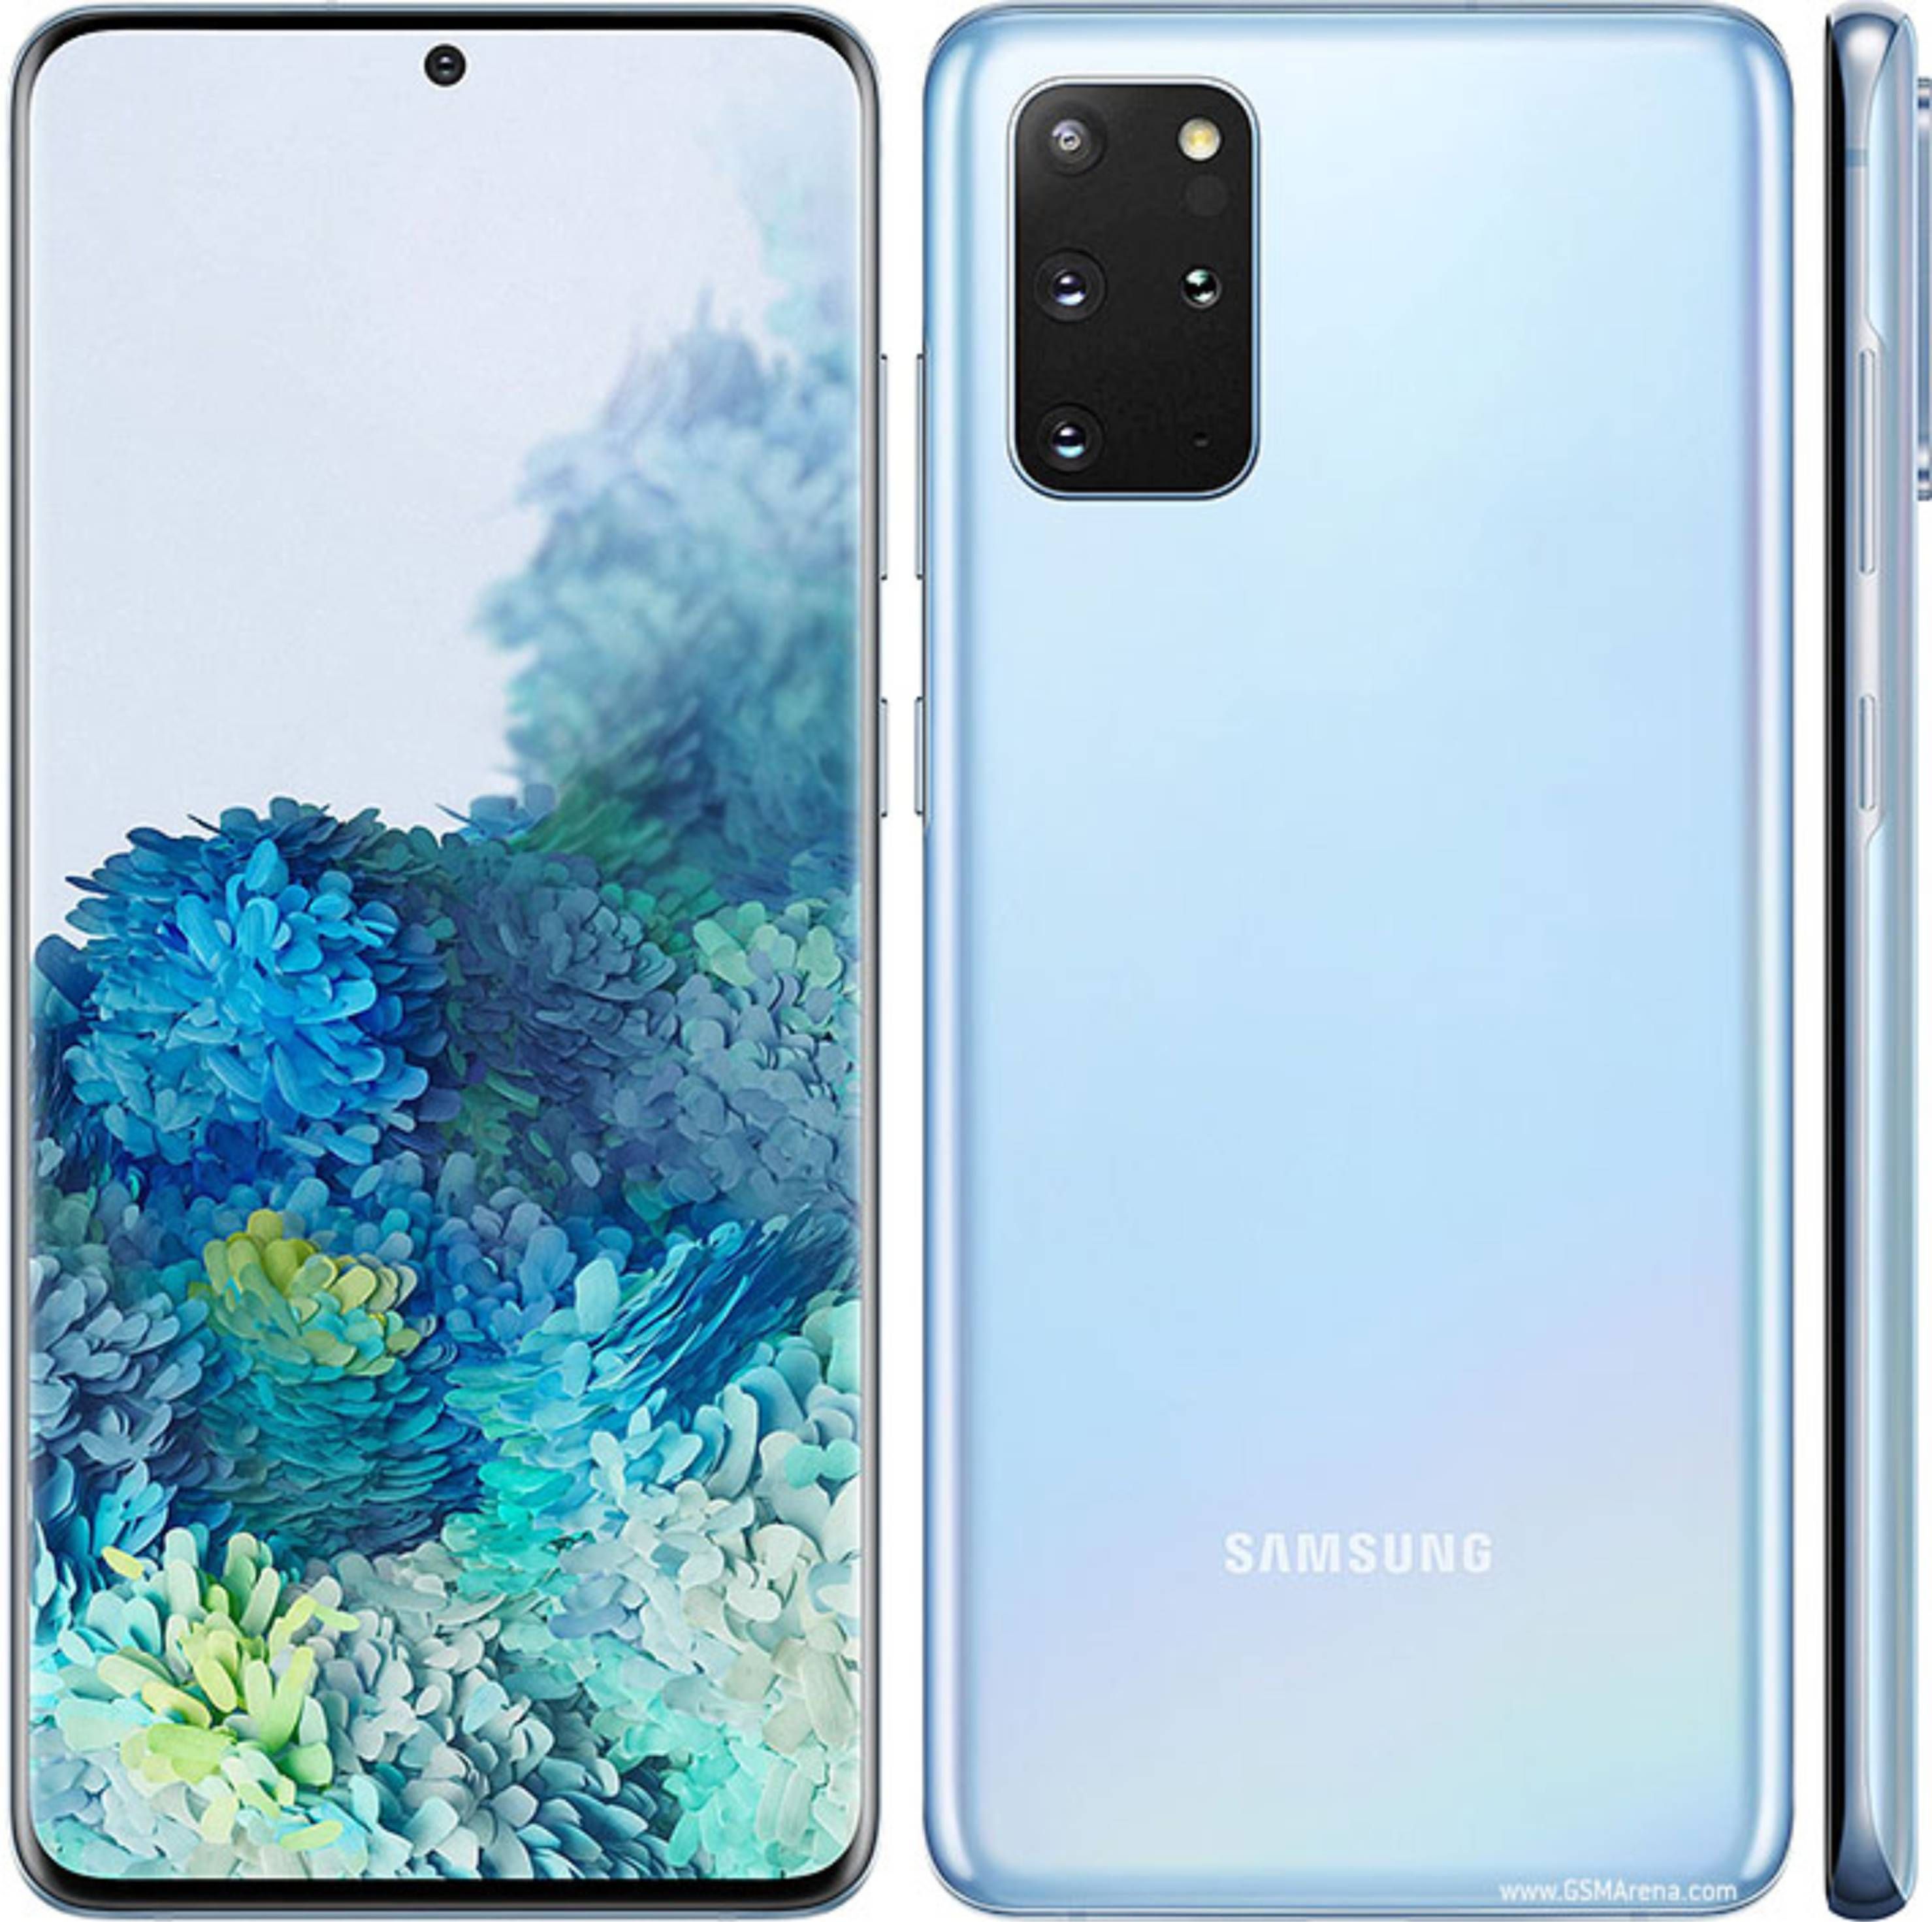 Samsung Galaxy S20 Plus Ultra 5G Specifications and Price in Kisii